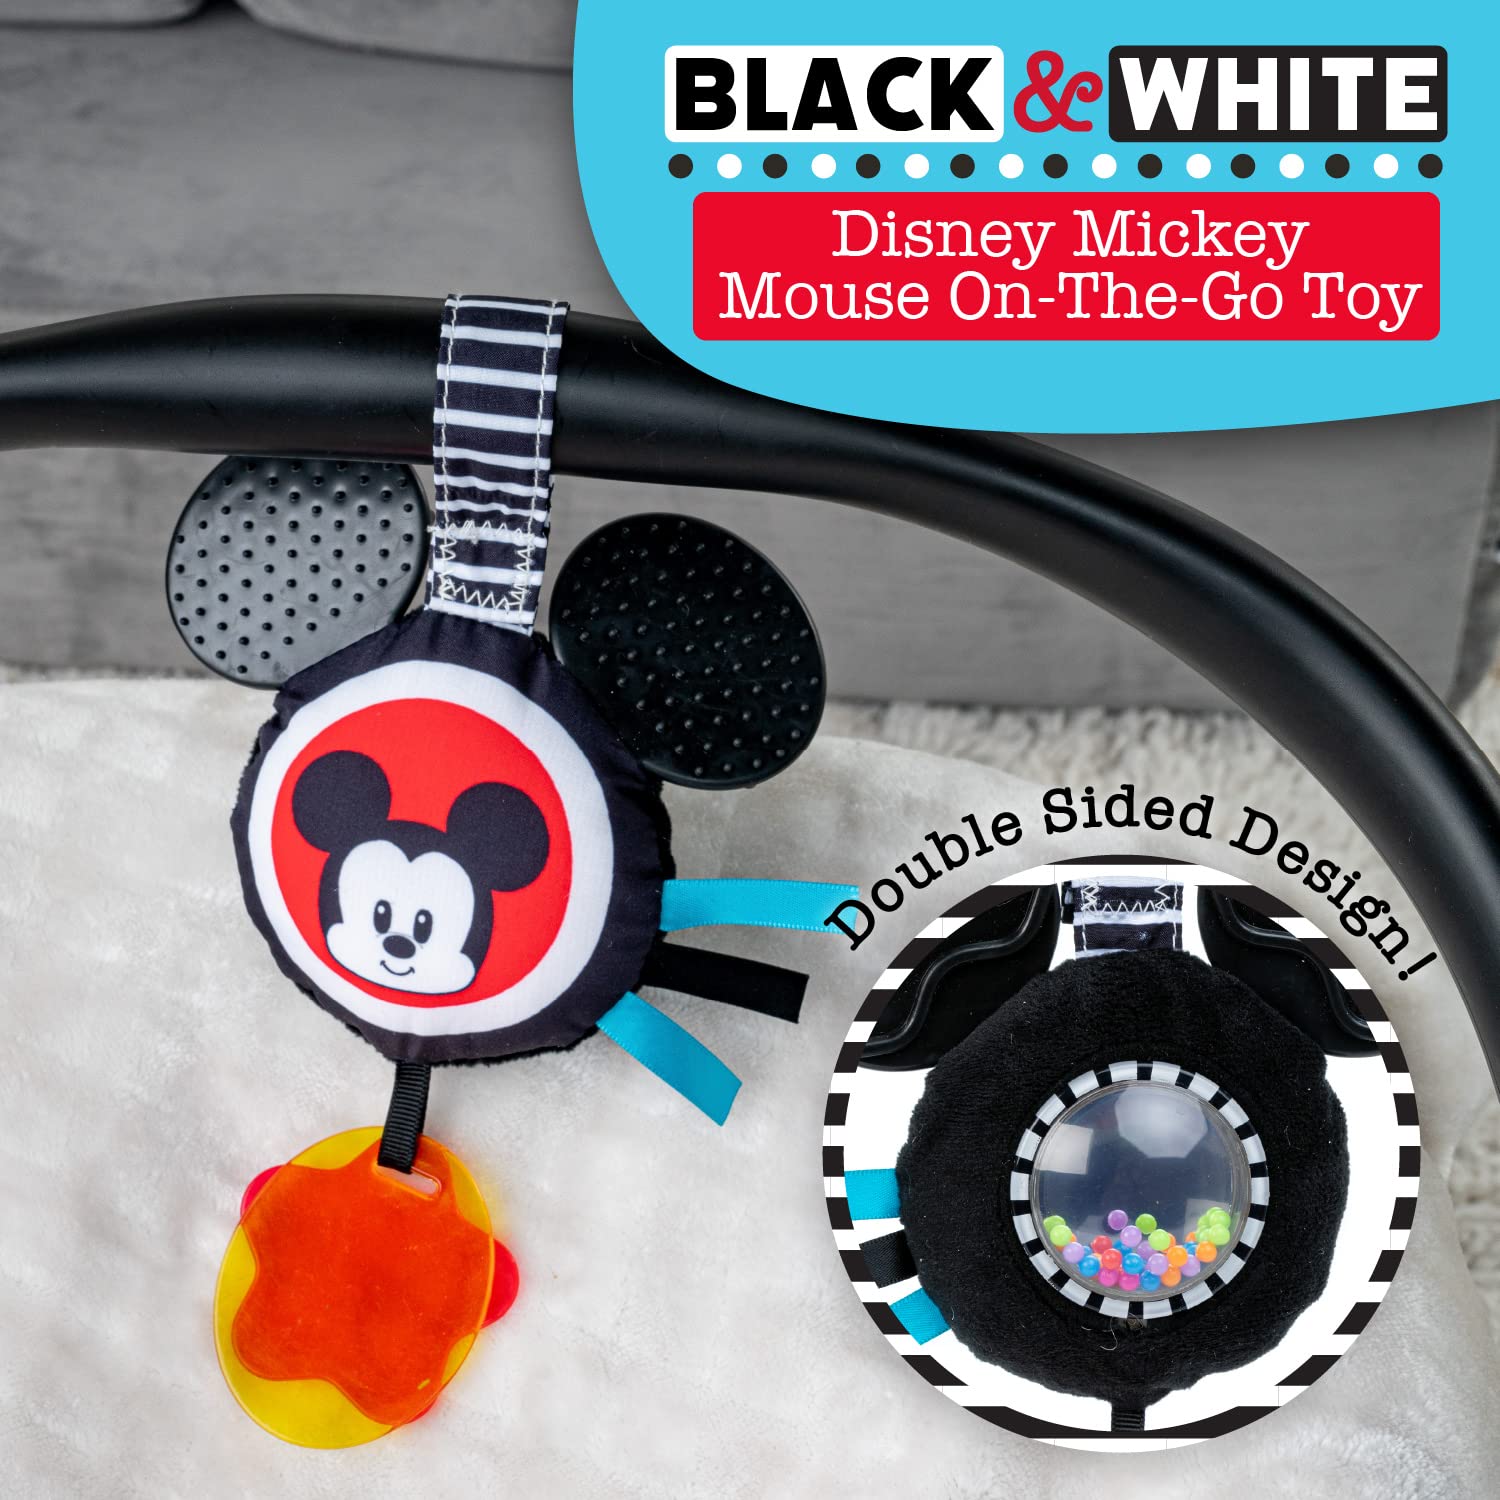 KIDS PREFERRED Disney Baby Mickey Mouse Hanging Toy, Black and White High Contrast Crinkle Plush, Boys and Girls Ages 0+, Stroller On The Go Activity Toy (81246)